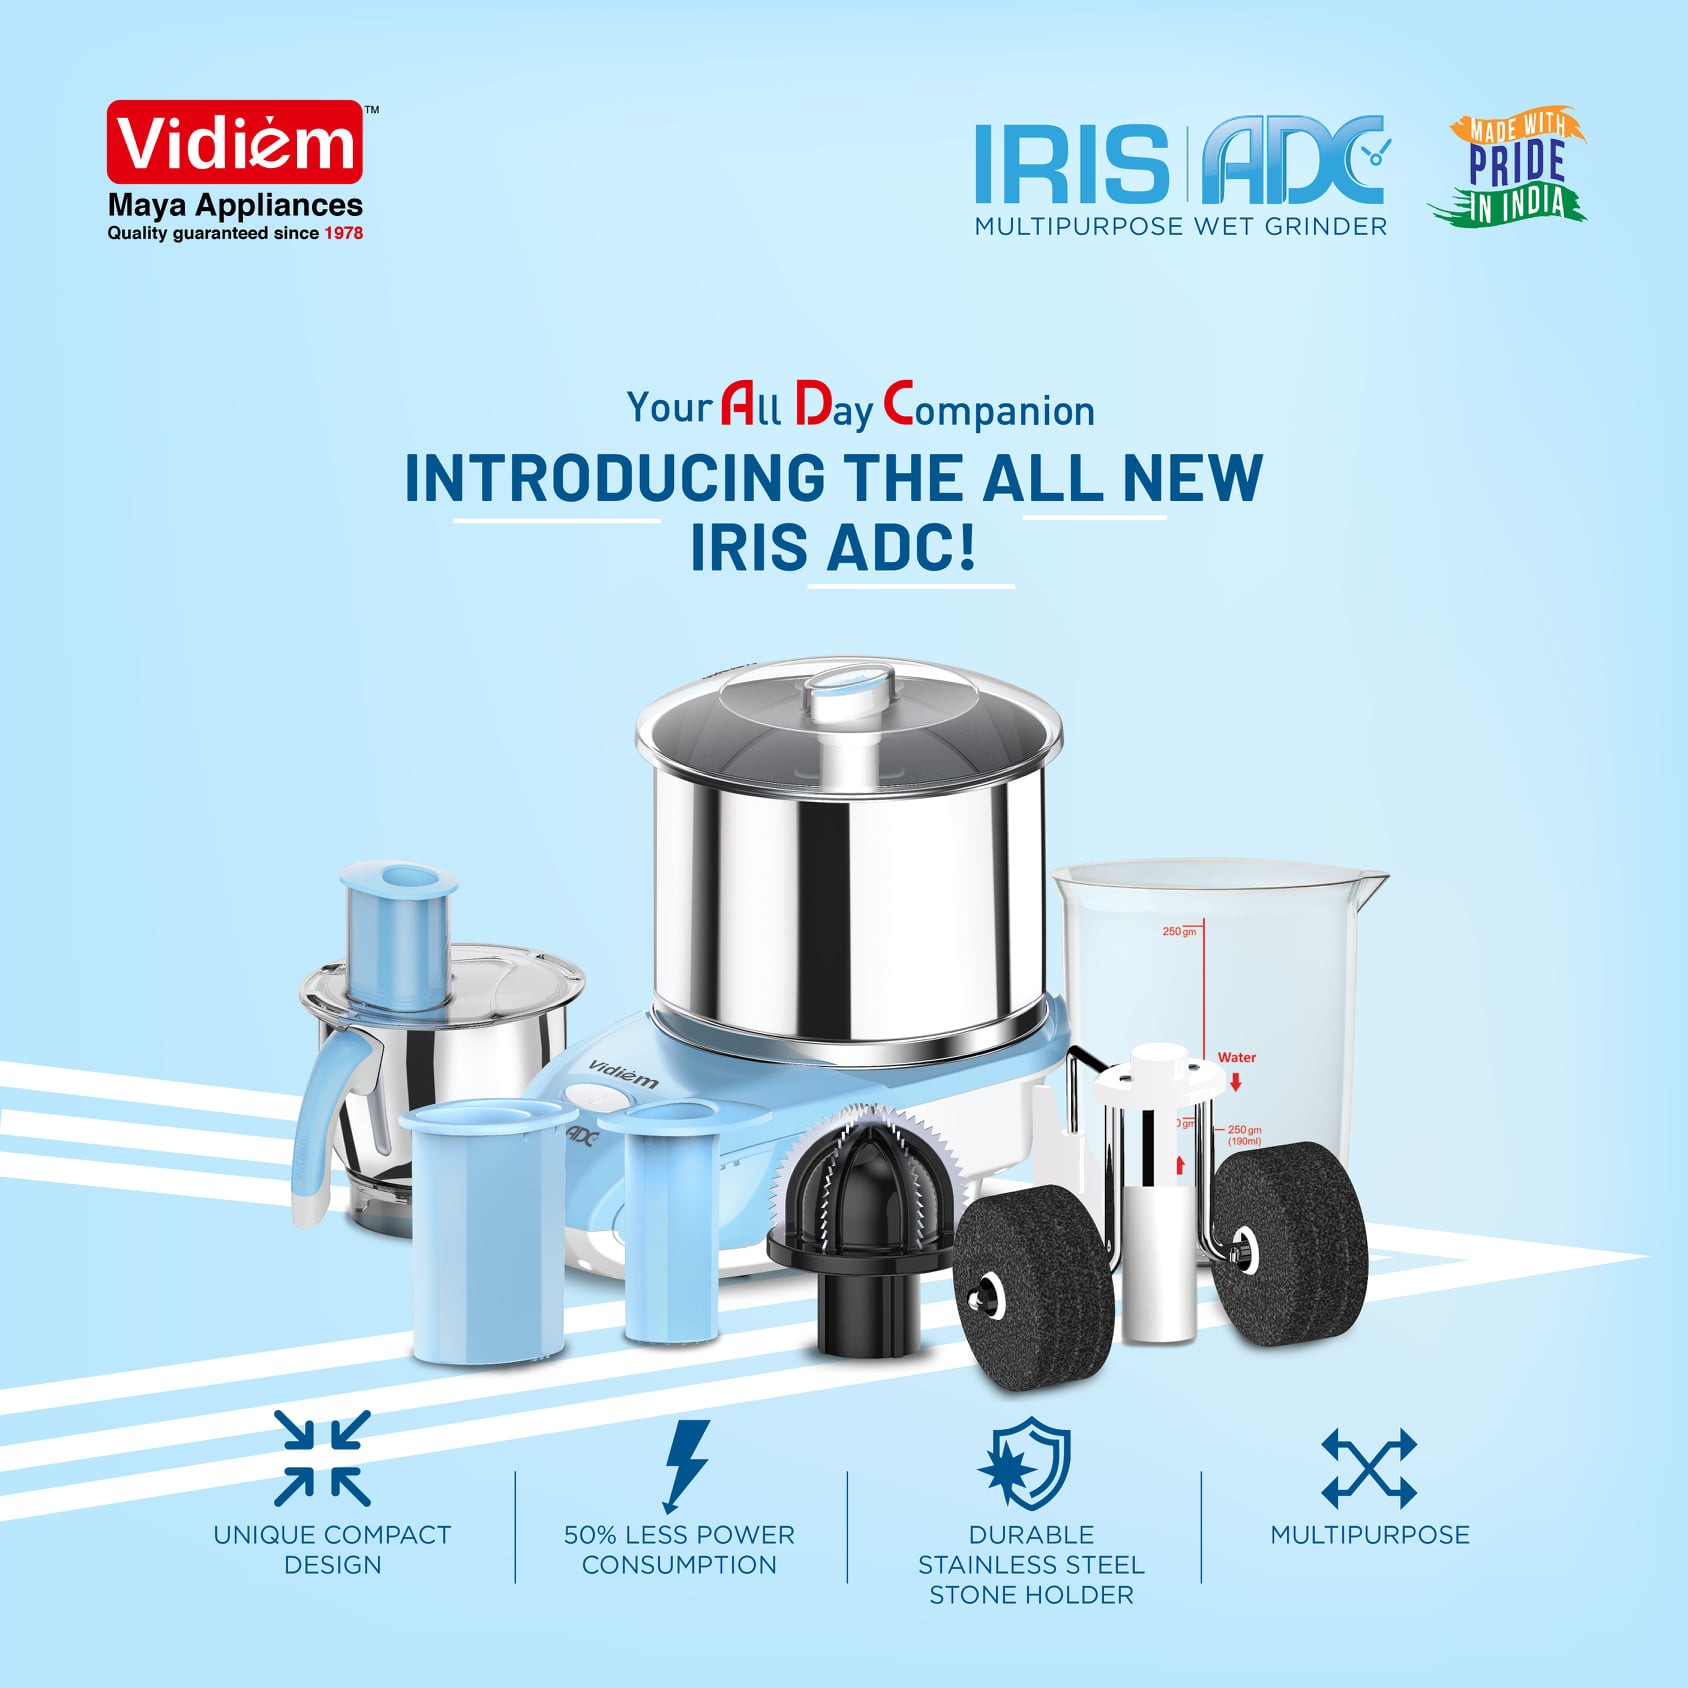 vidiem-iris-2l-multi-purpose-wet-grinder-ss-drum-stone-rollers-food-processor-multi-chef-jar-atta-kneader-110v90w-for-usa-canada-motor-rpm-1440-and-drum-rpm-150-home-commercial-use8